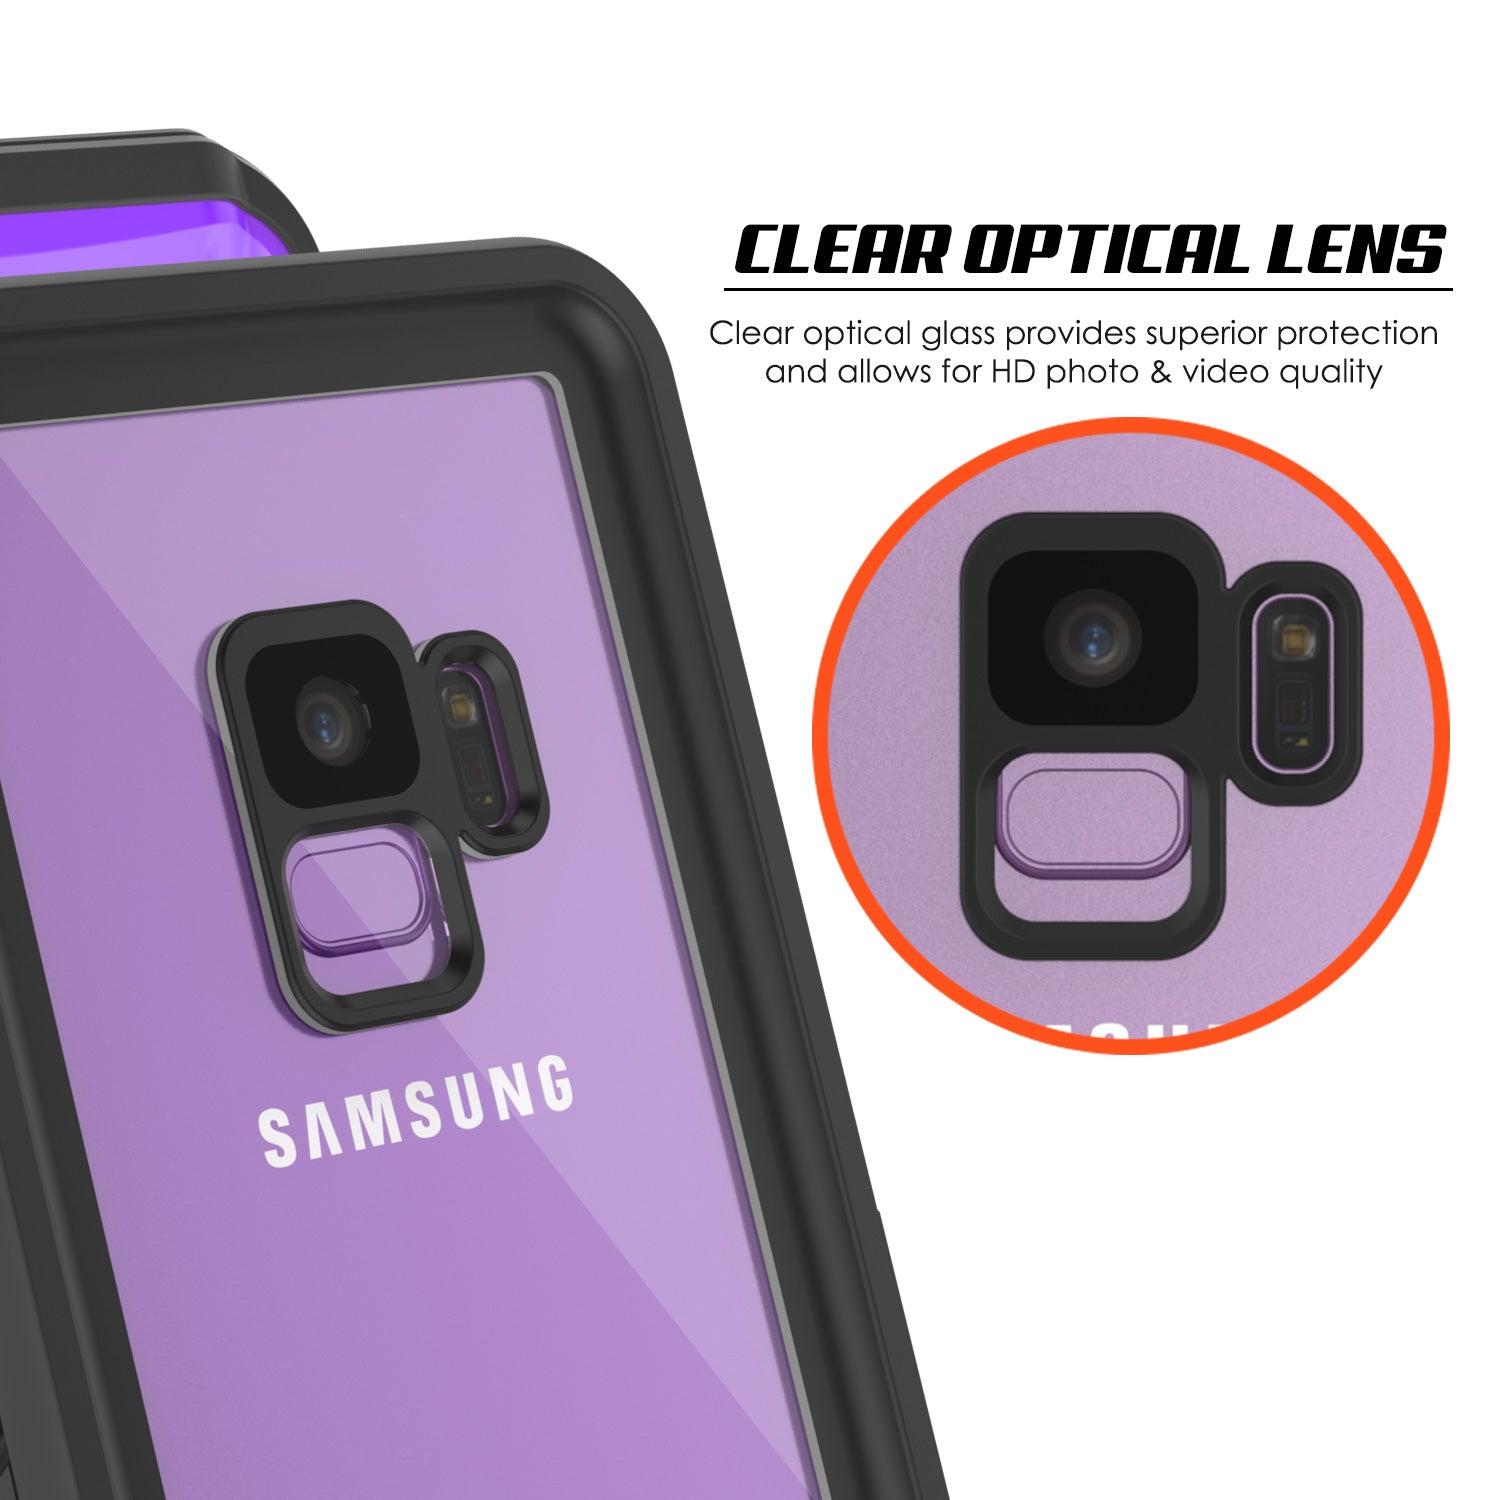 Galaxy S9 PLUS Waterproof Case, Punkcase [Extreme Series] [Slim Fit] [IP68 Certified] [Shockproof] [Snowproof] [Dirproof] Armor Cover W/ Built In Screen Protector for Samsung Galaxy S9+ [Purple] - PunkCase NZ